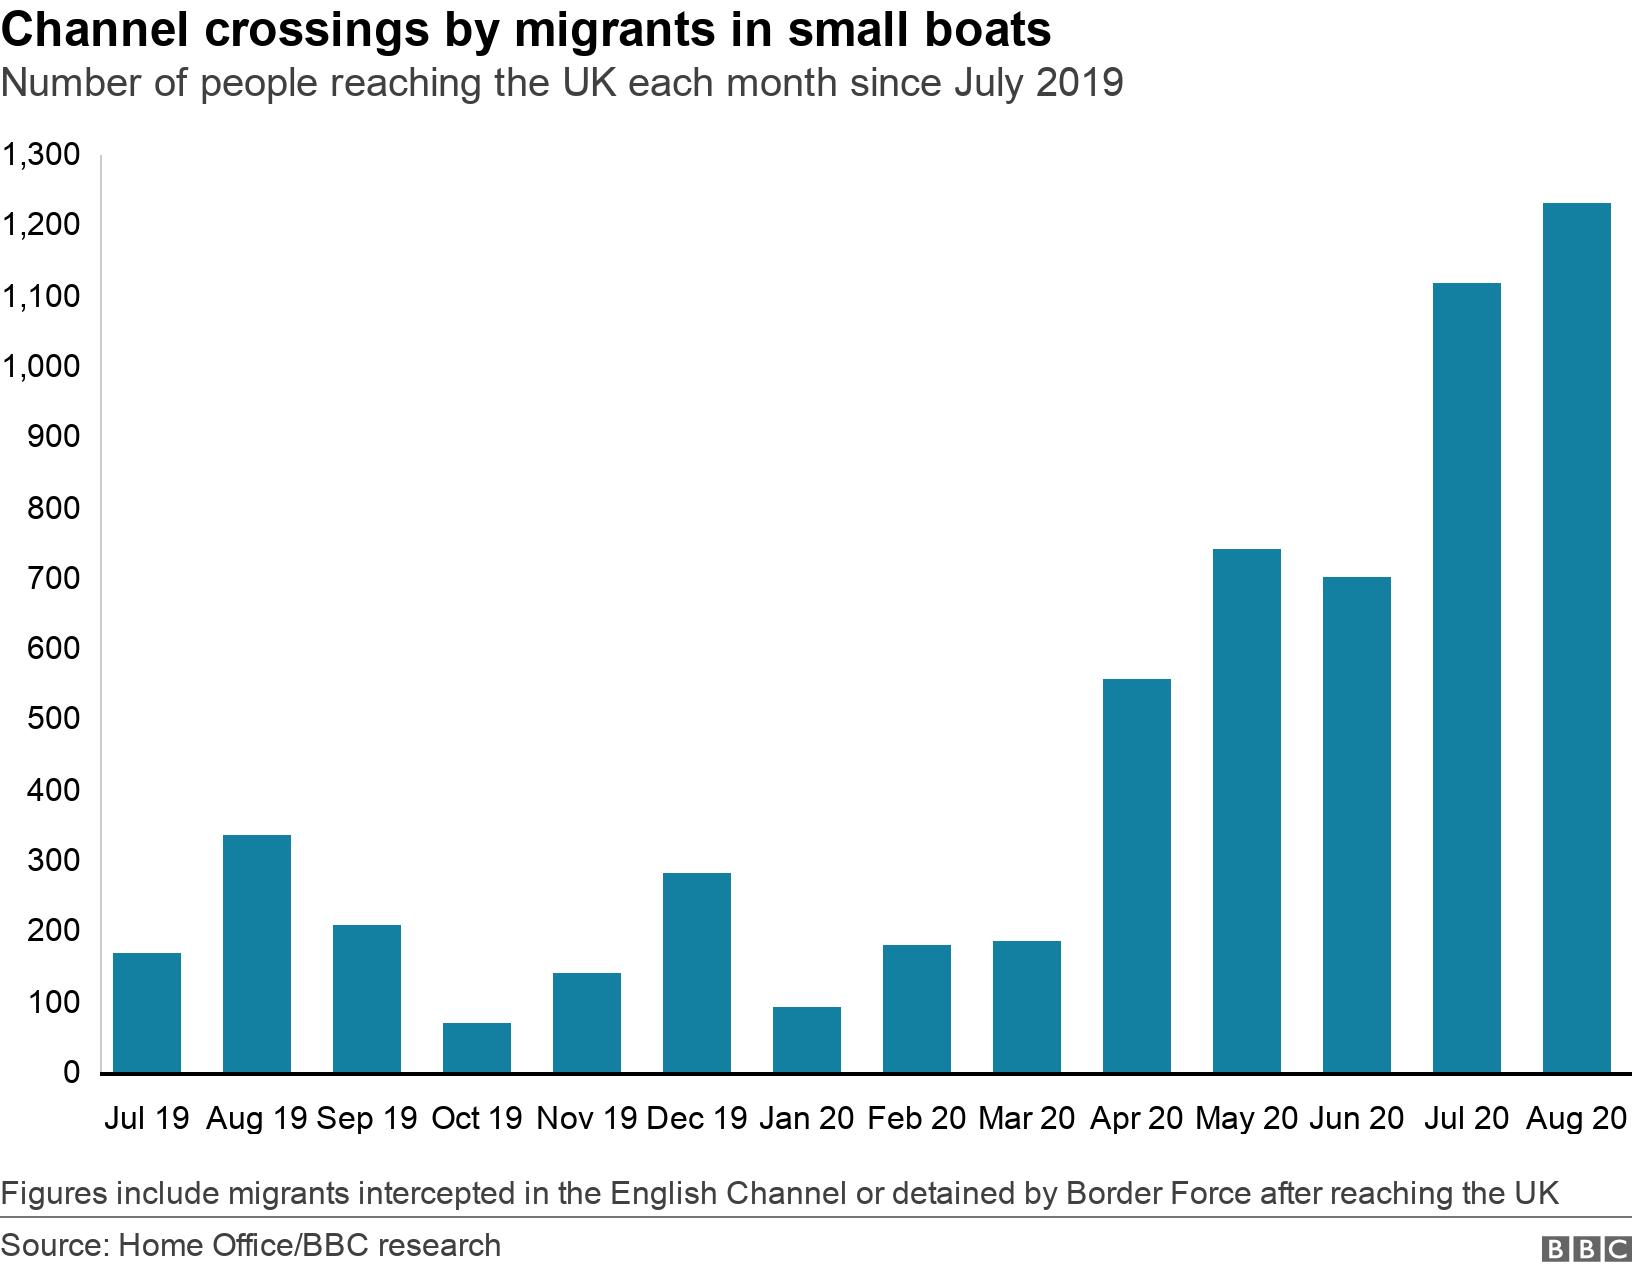 Channel crossings by migrants in small boats. Number of people reaching the UK each month since July 2019.  Figures include migrants intercepted in the English Channel or detained by Border Force after reaching the UK.